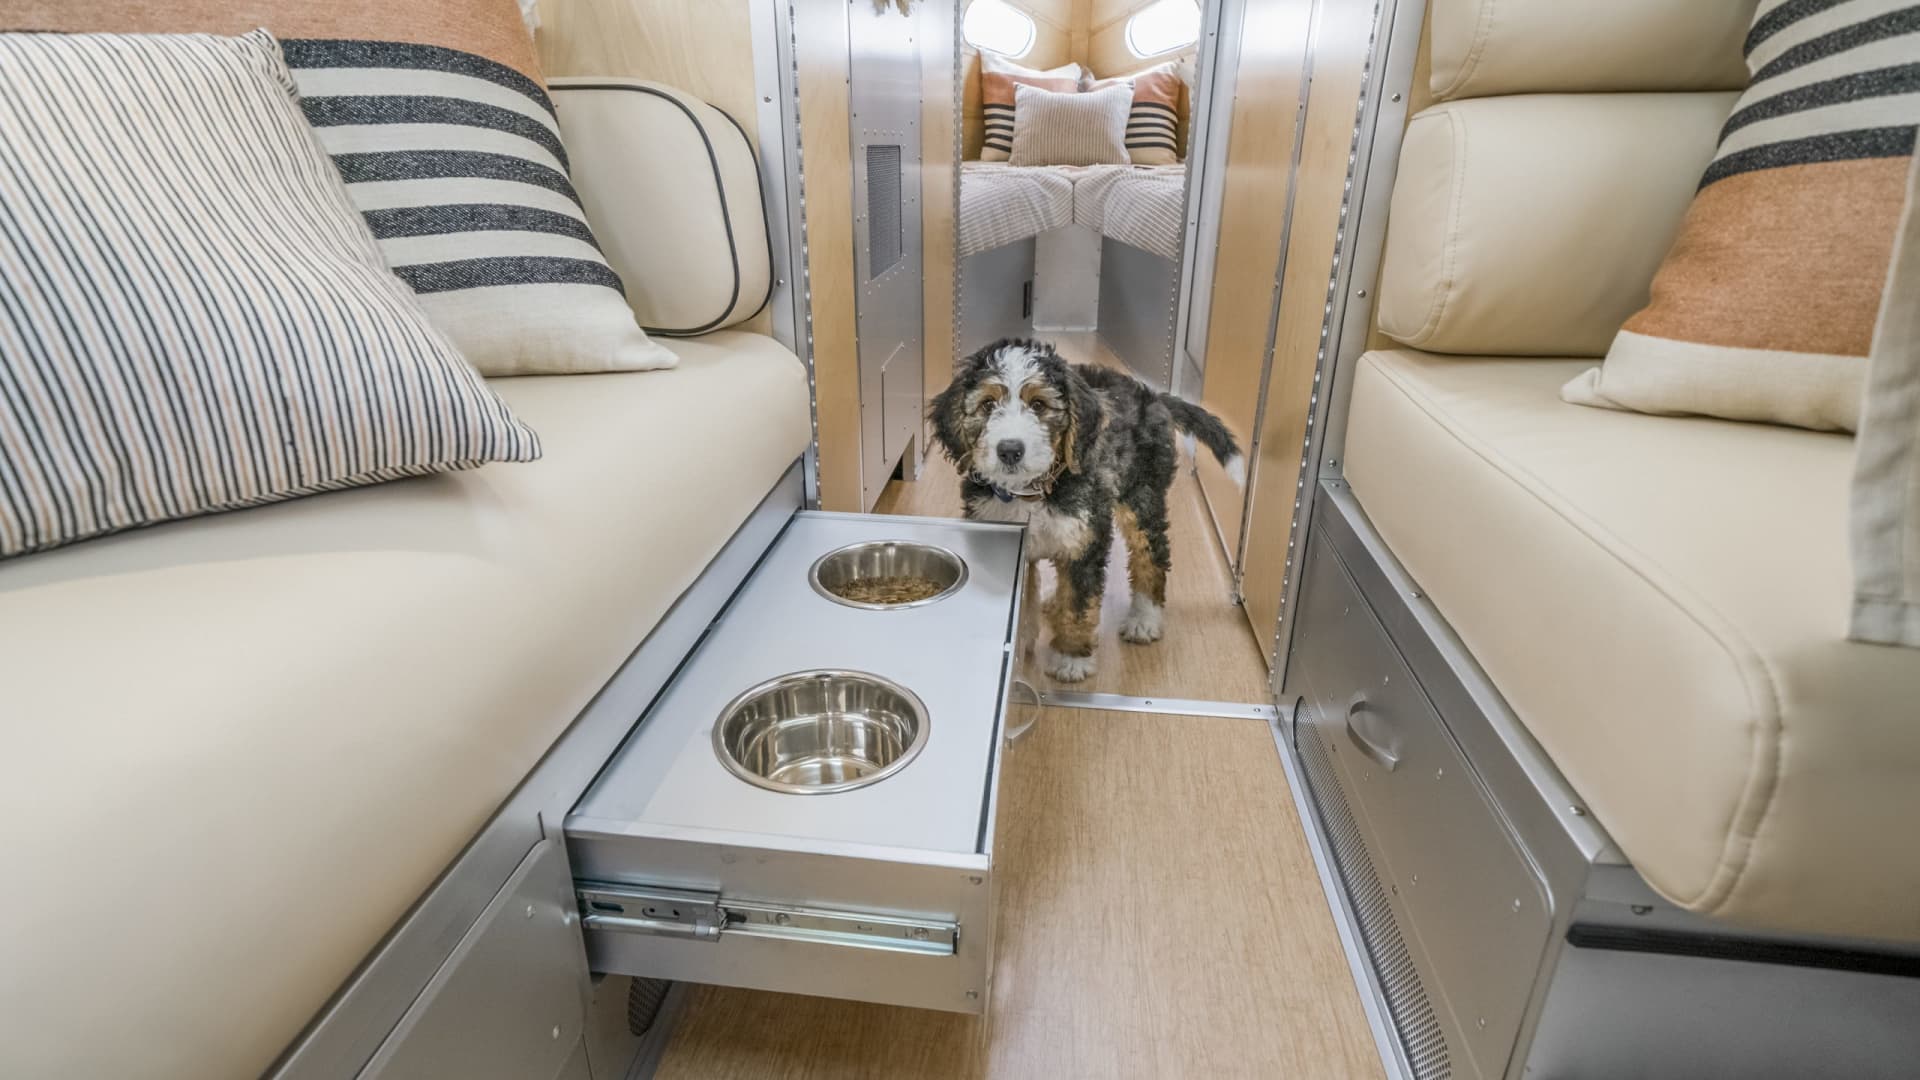 The Volterra's interior comes with hideaway pet food dishes.